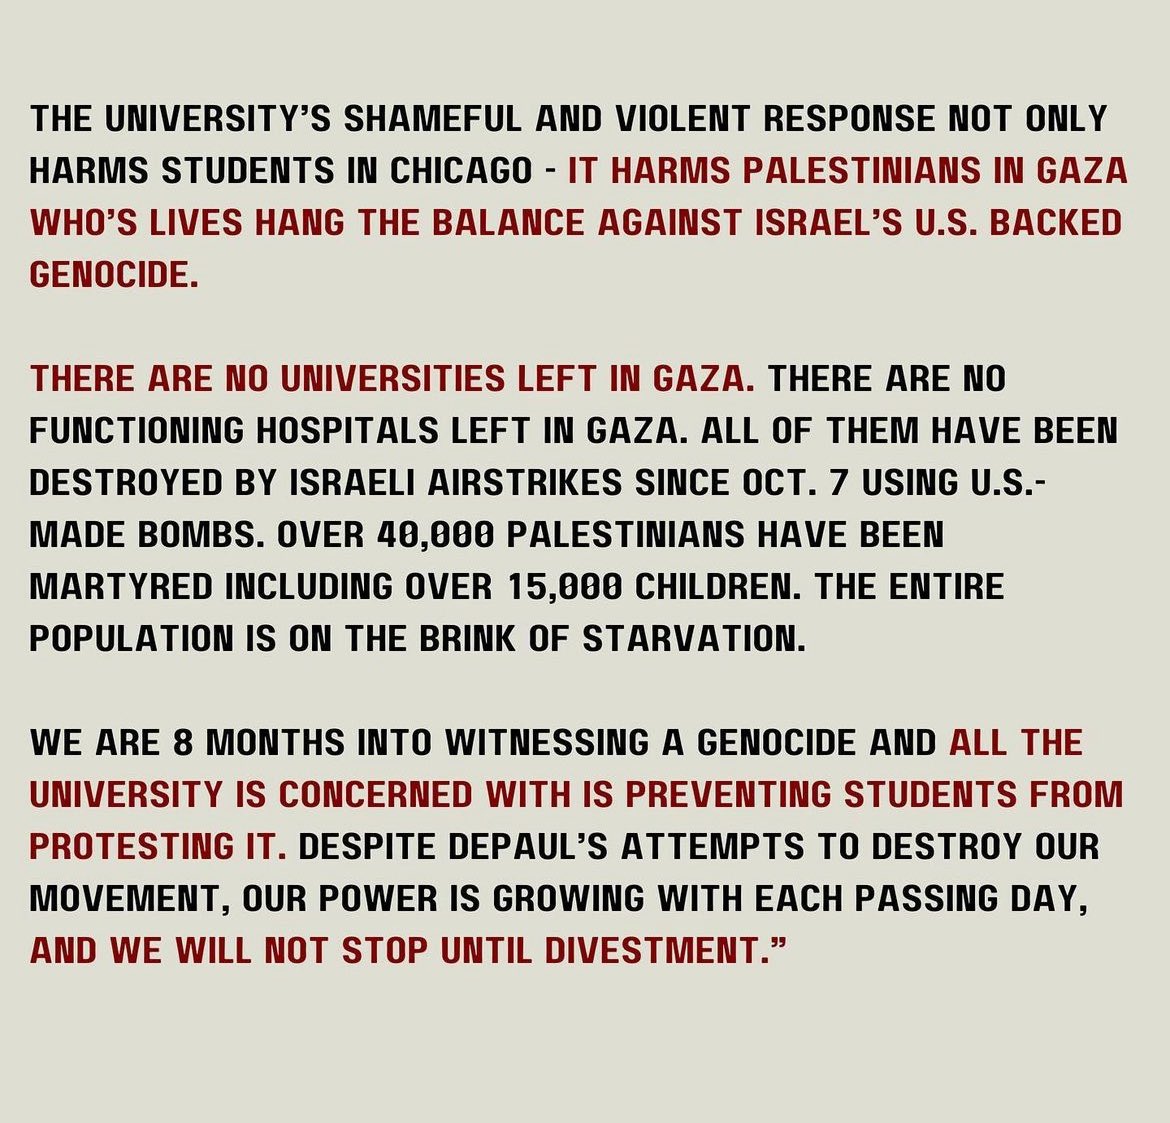 Shame on @DePaulU! Conducting a VIOLENT police raid and arresting students in the middle of the night for a PEACEFUL form of protest is INHUMANE and completely unacceptable.